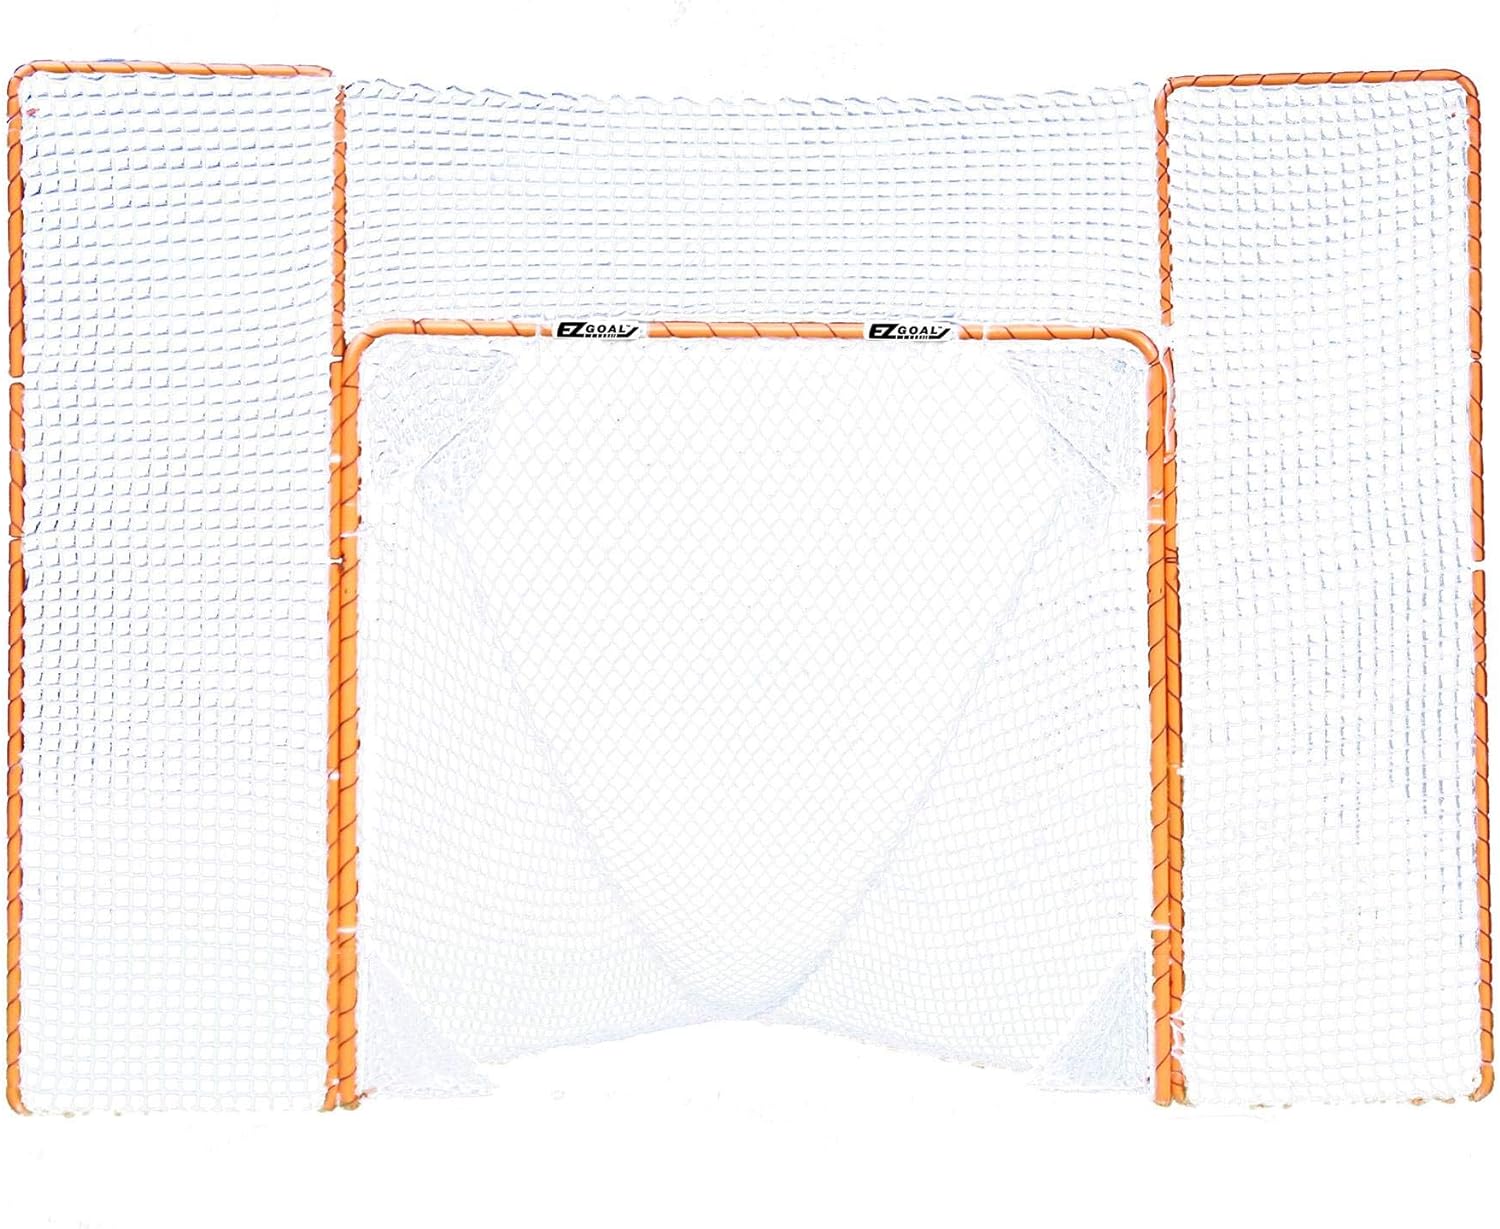 EZGoal Lacrosse Folding Goal with Backstop and Targets, Orange, 6' x 6' - $100